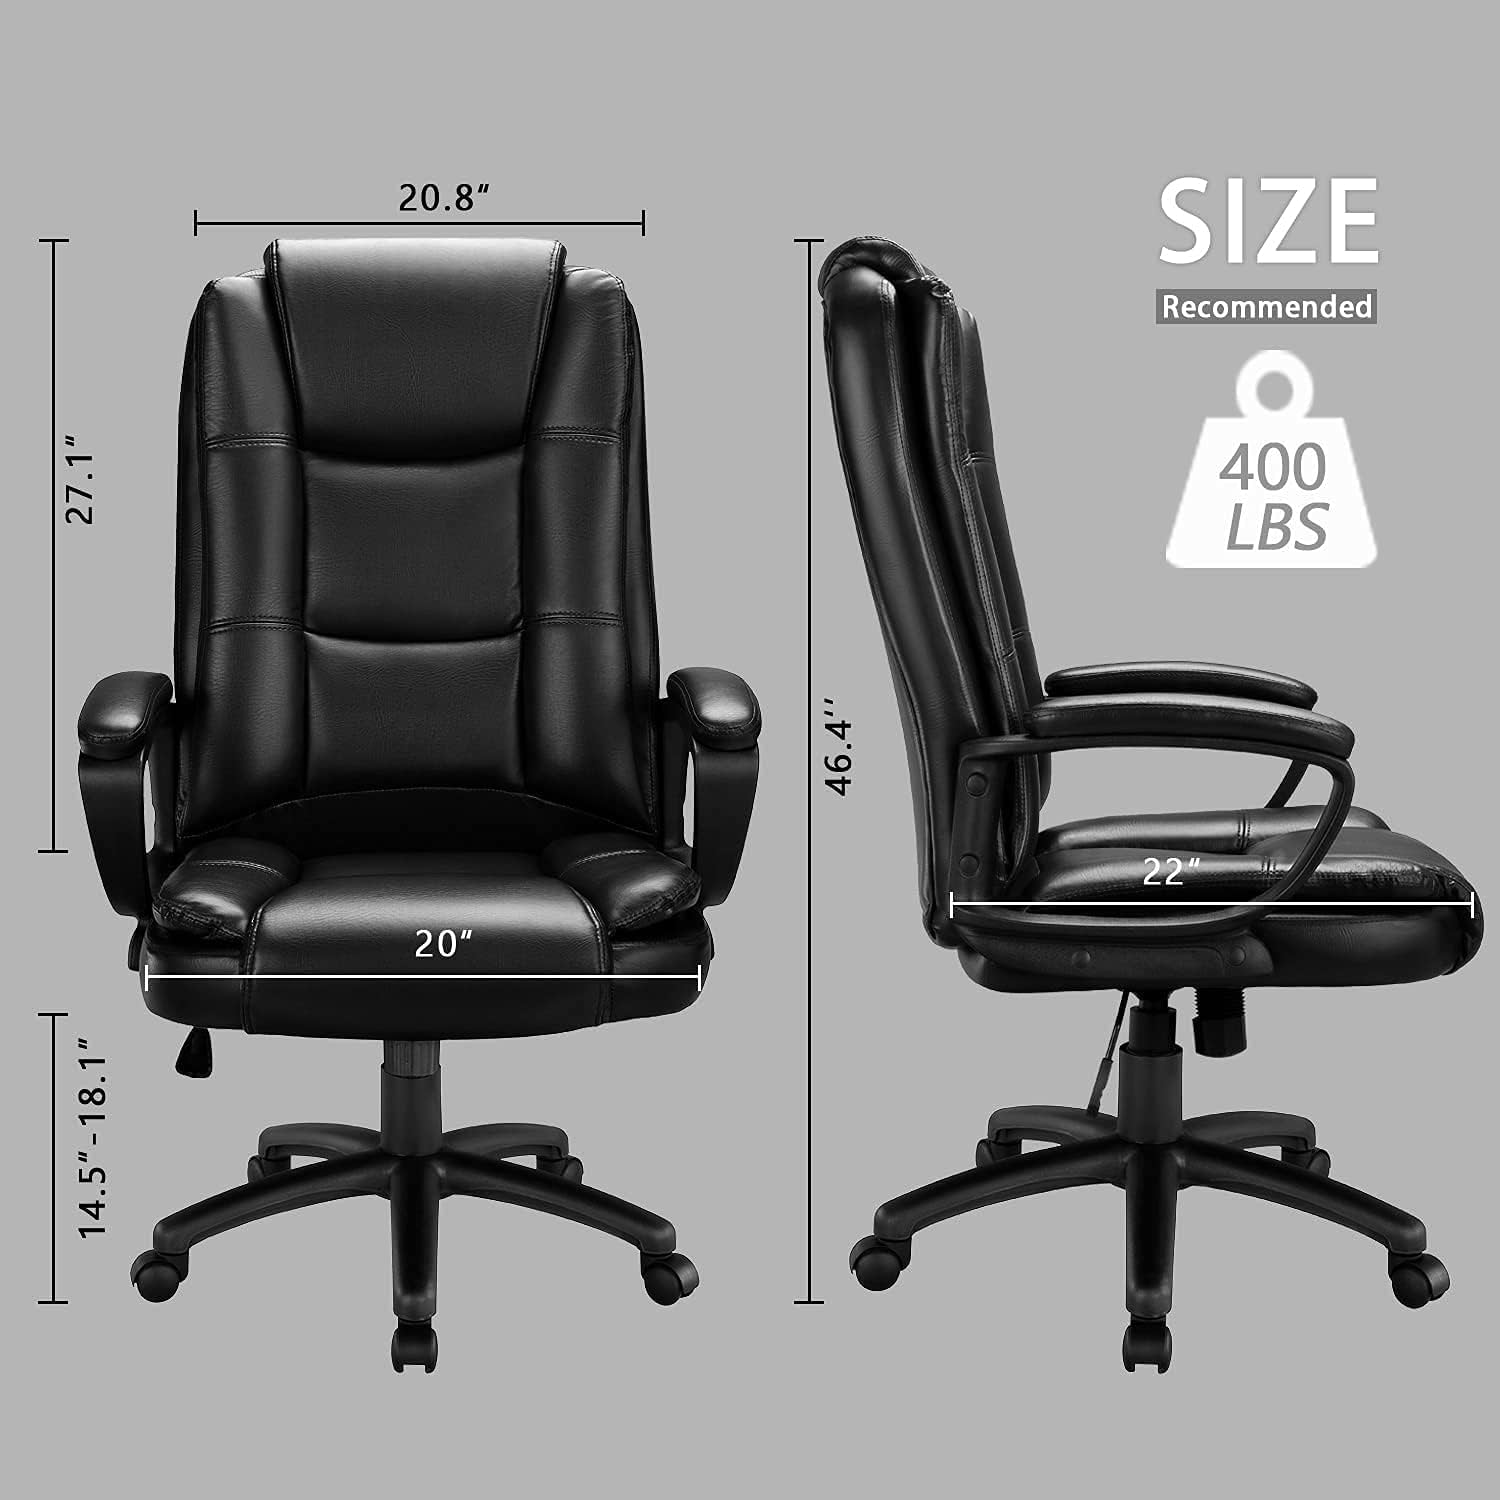 Waleaf Home Office Chair, Big and Tall Desk Chair 8Hours Heavy Duty Design, Ergonomic High Back Cushion Lumbar Back Support, Computer Desk Chair, Adjustable Executive Leather Chair with Arms - image 3 of 8